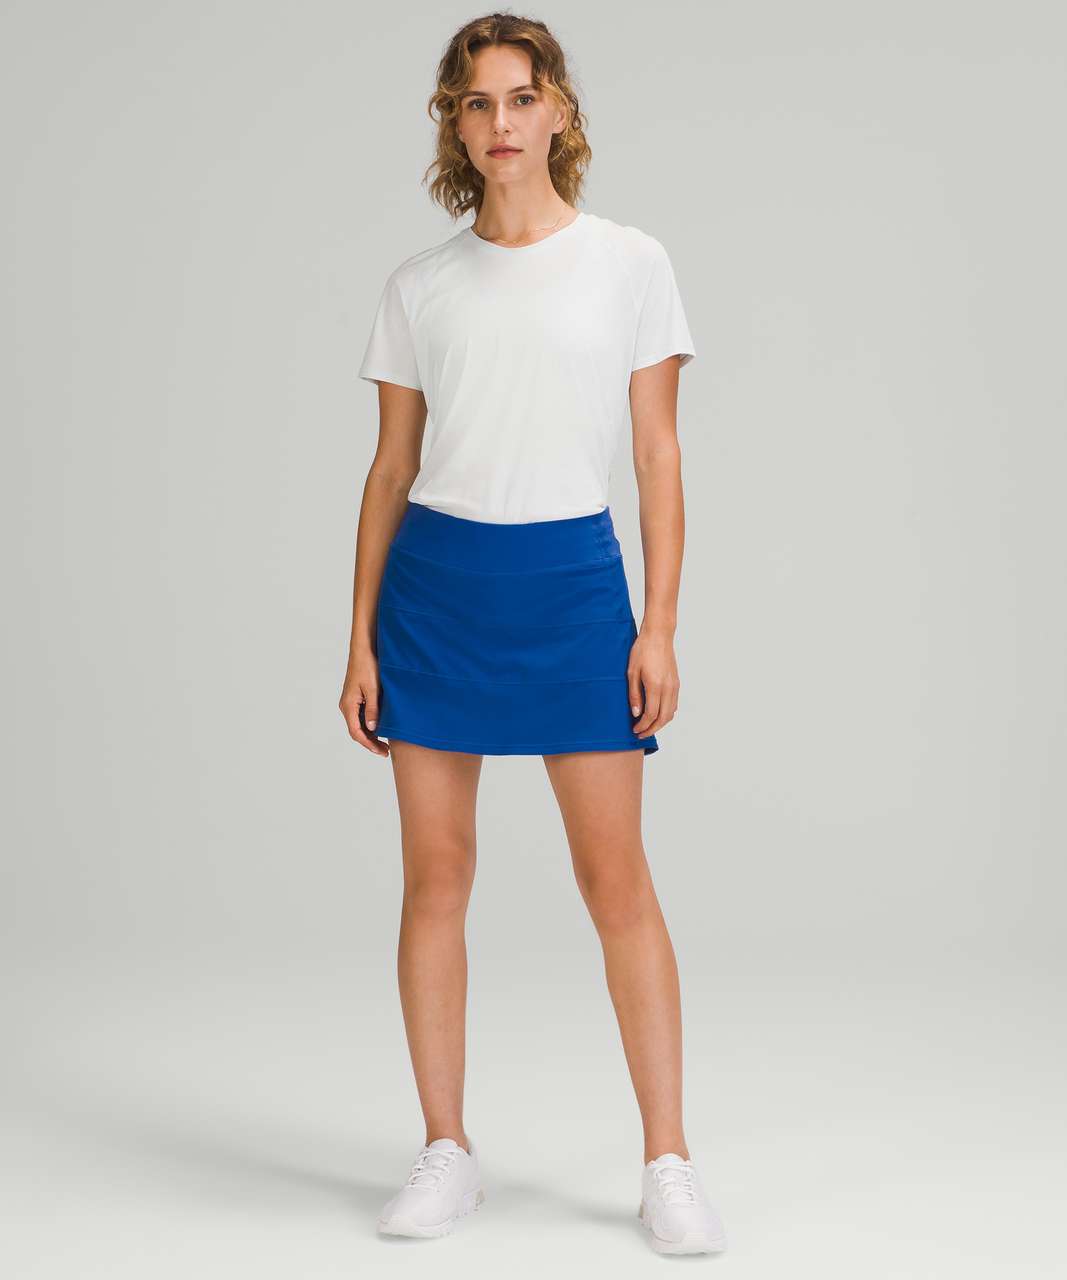 Lululemon Pace Rival Mid-Rise Skirt *Tall - Symphony Blue